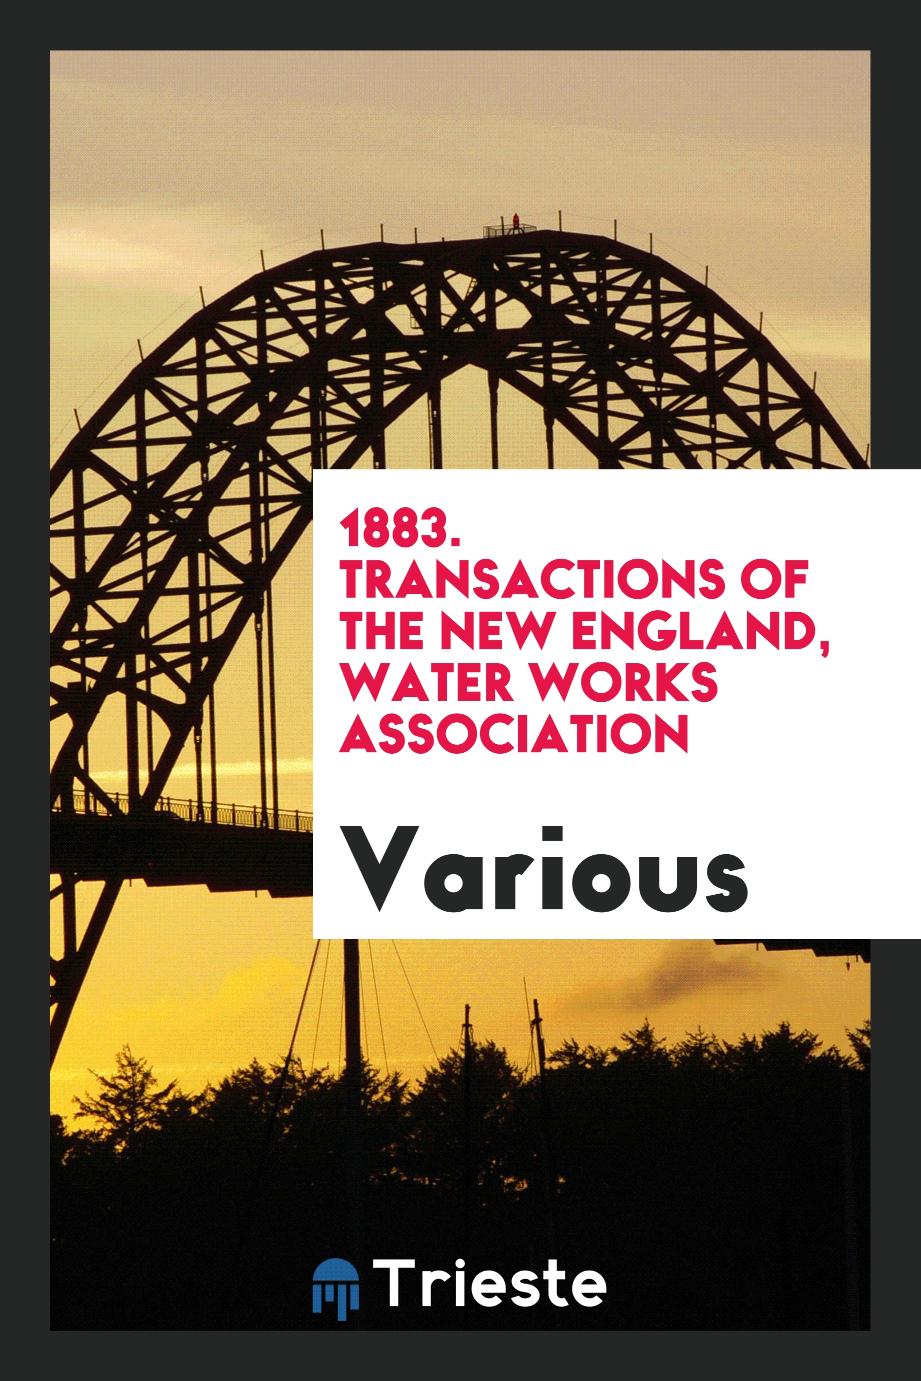 1883. Transactions of the new England, water works association